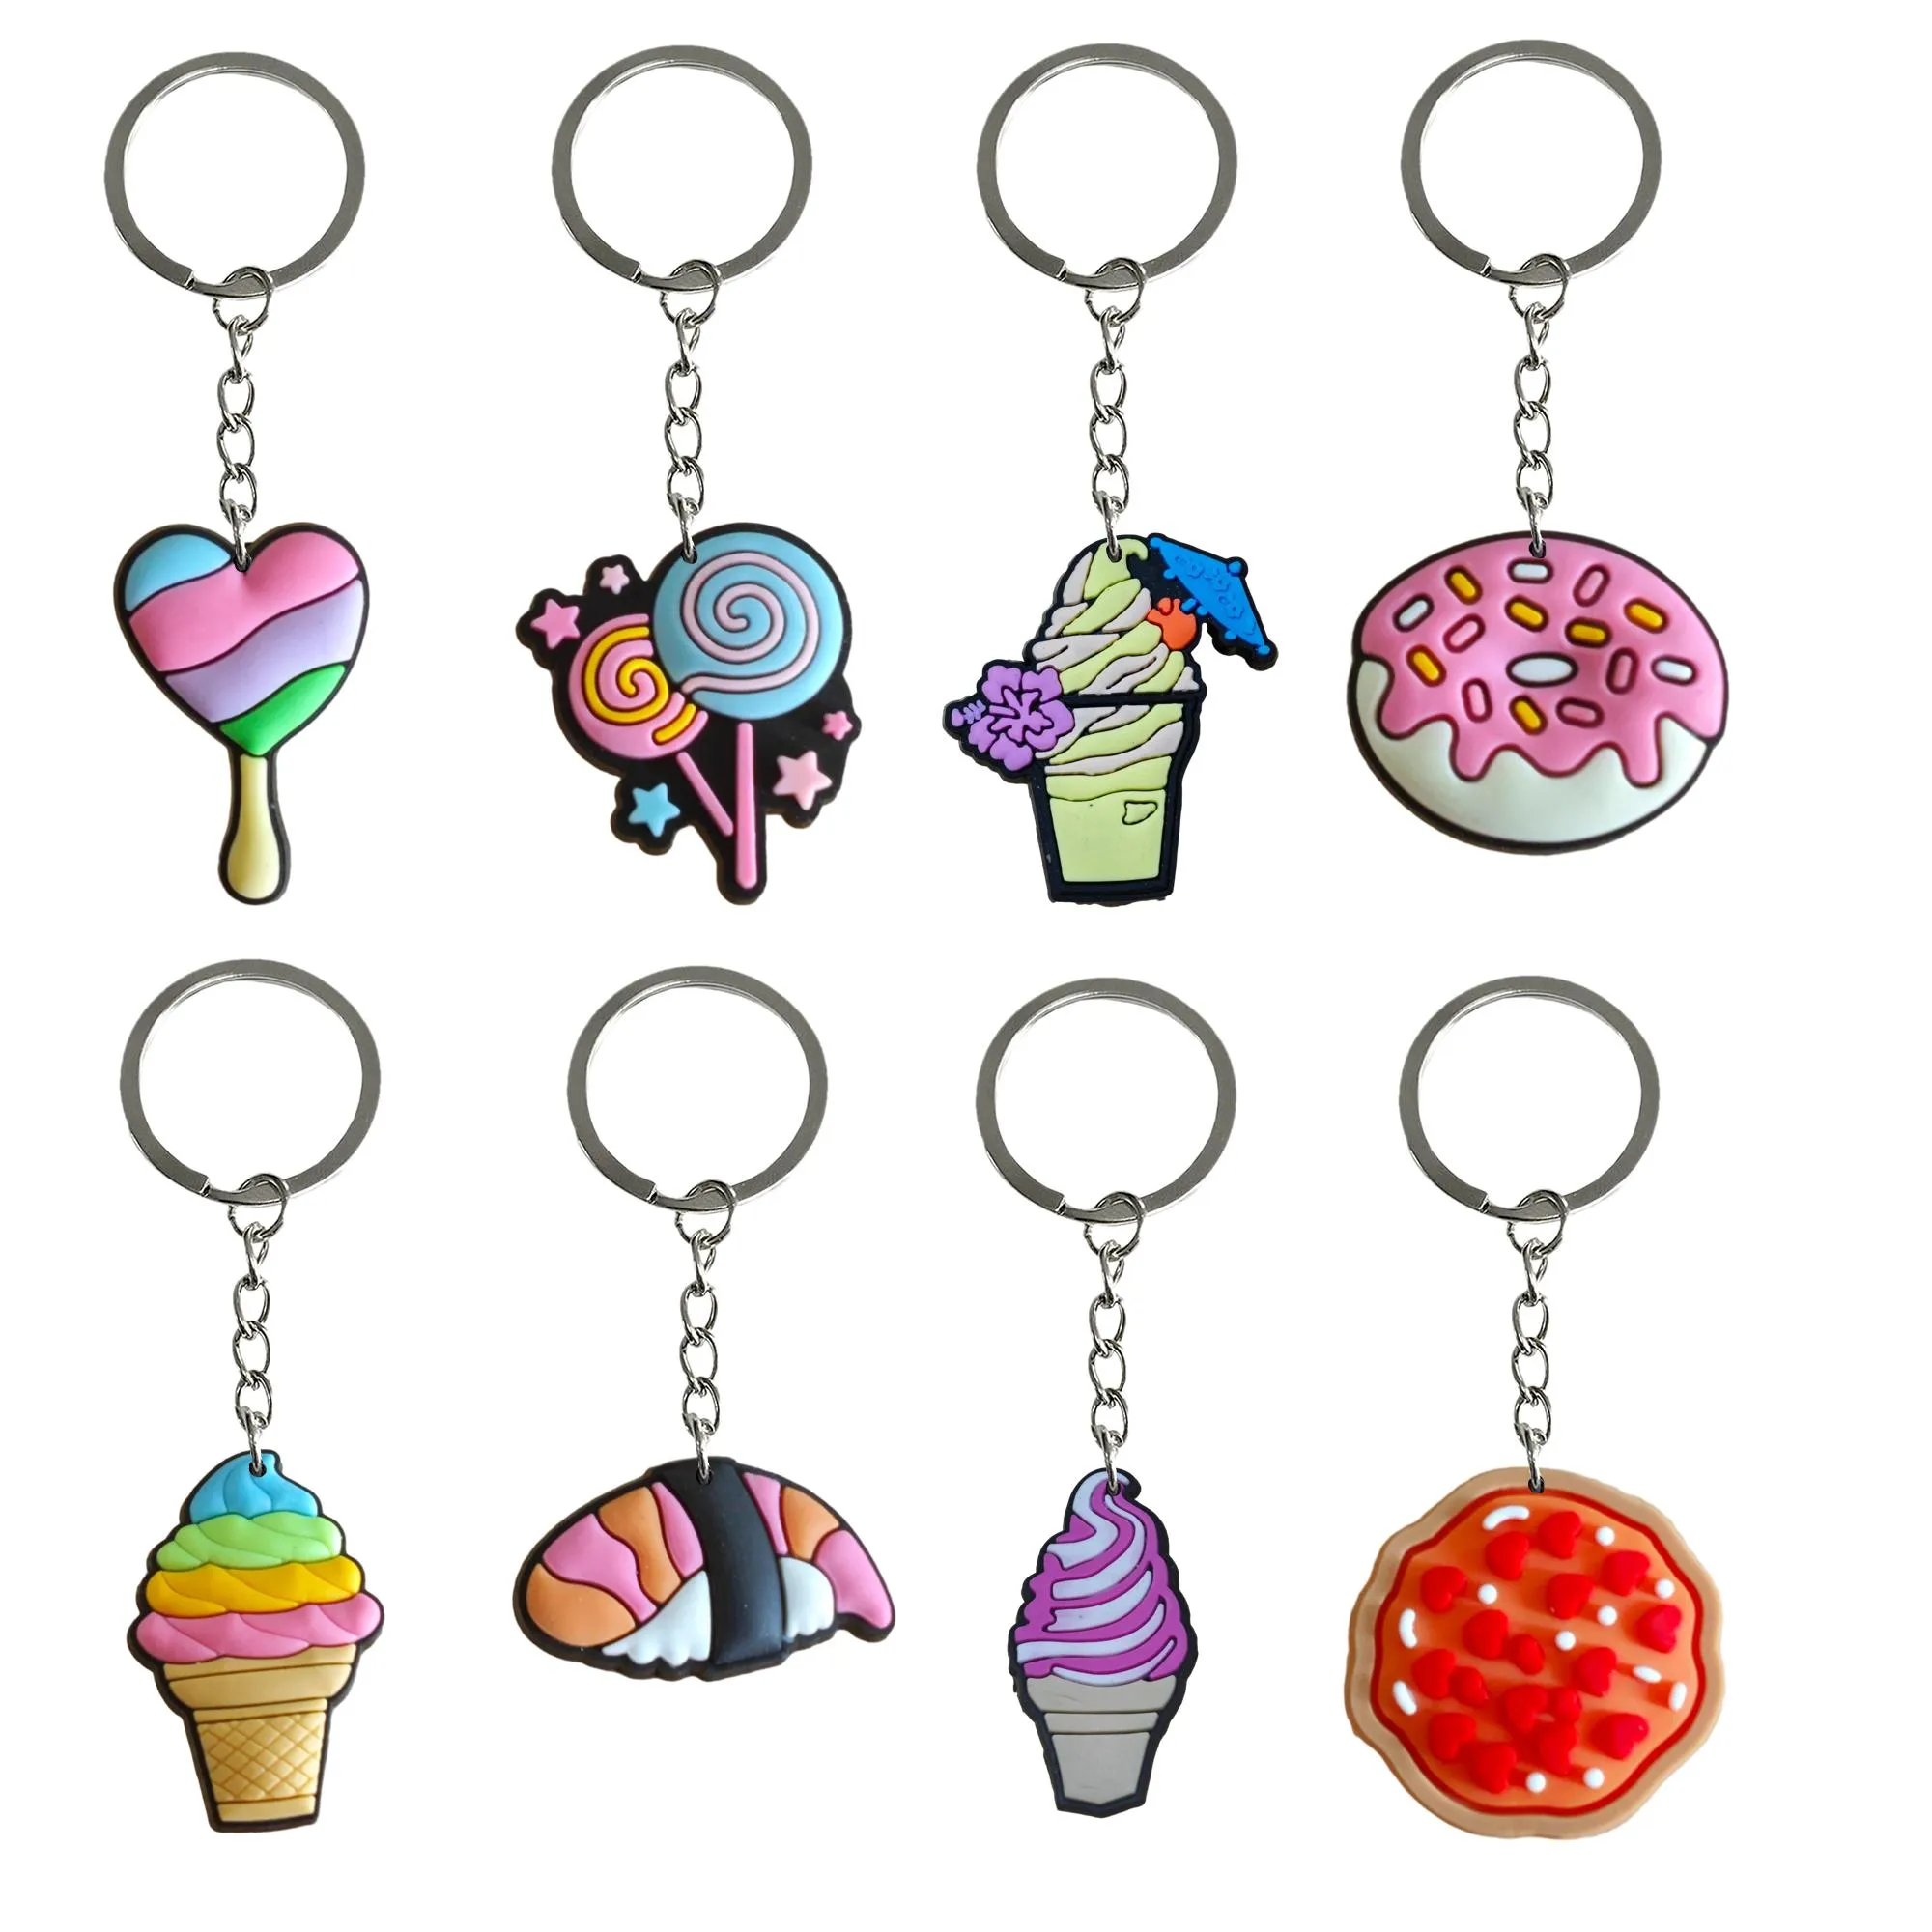 Cartoon Accessories Ice Cream 2 10 Keychain Cool Keychains For Backpacks Key Chain Ring Christmas Gift Fans Men Keyring Suitable Schoo Ottbq